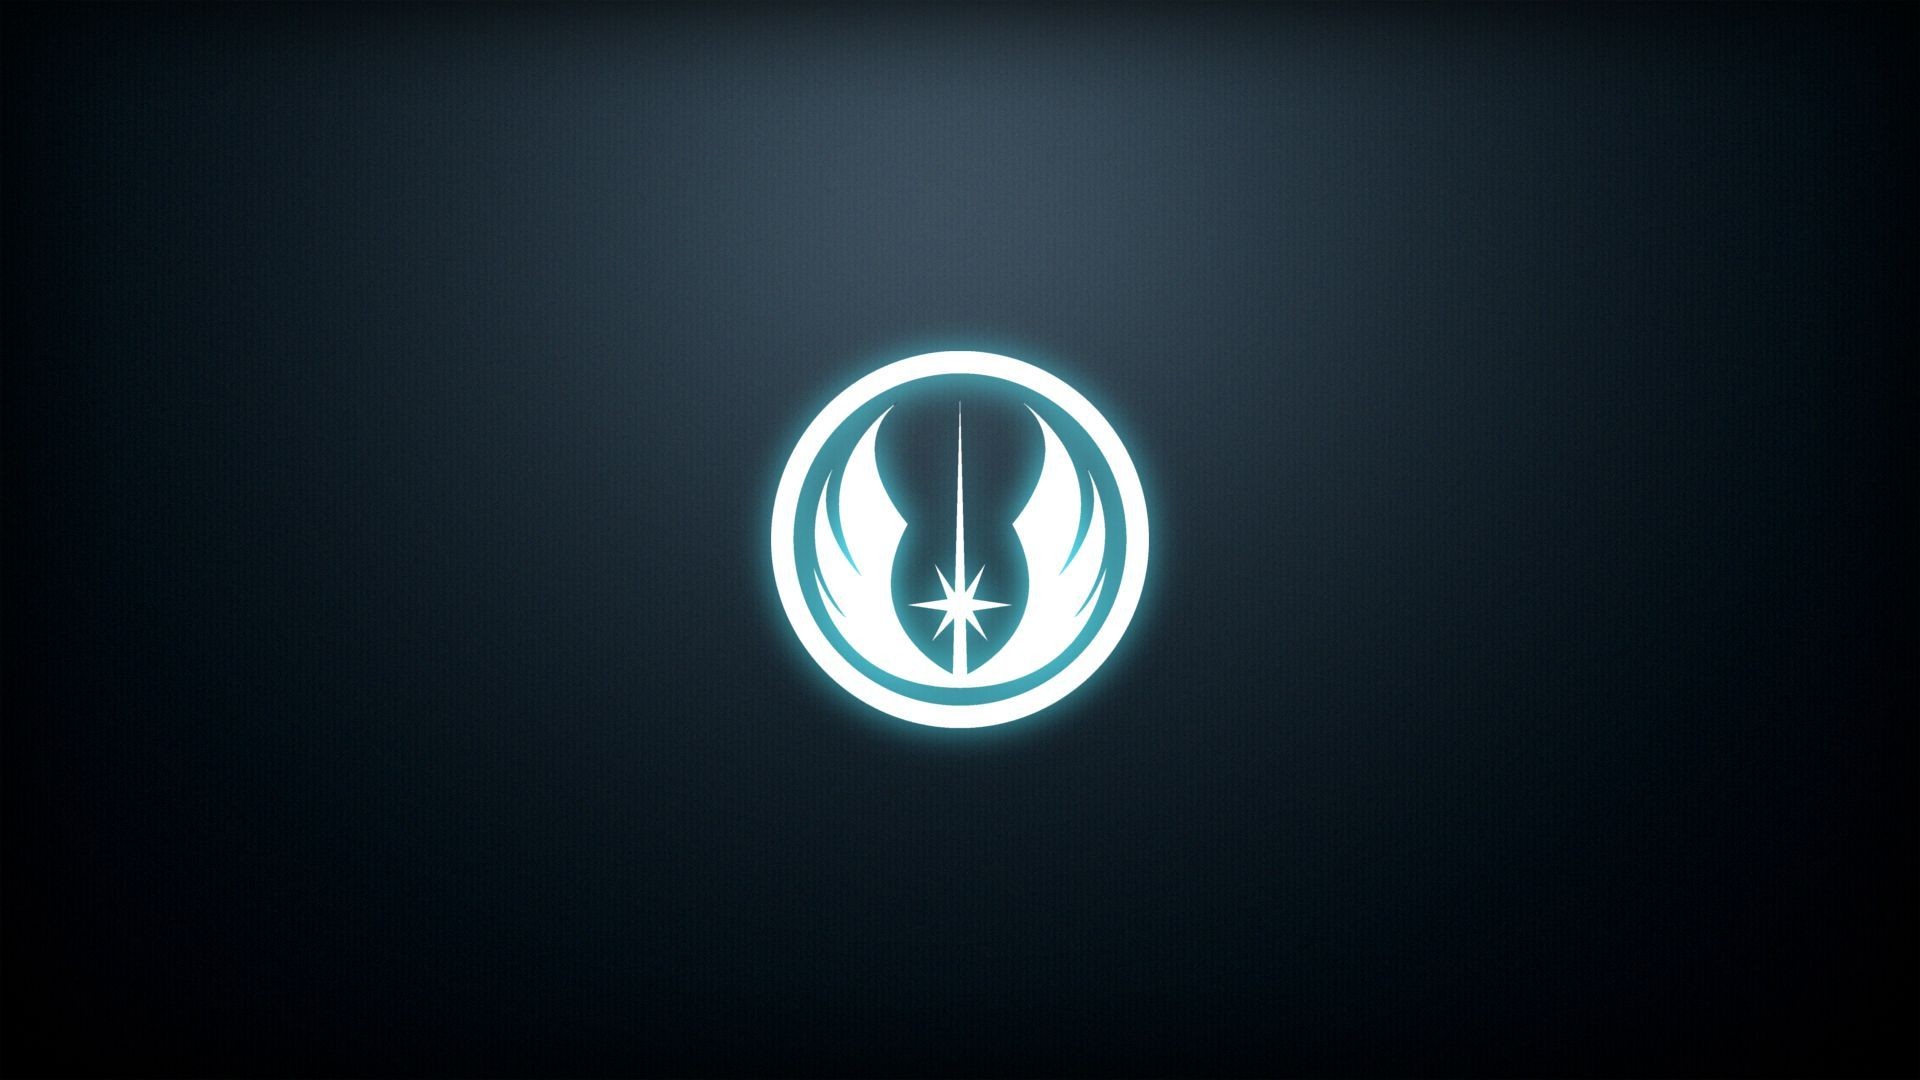 1920x1080 A wallpaper you guys might like. The Jedi Order emblem. Ill do a .